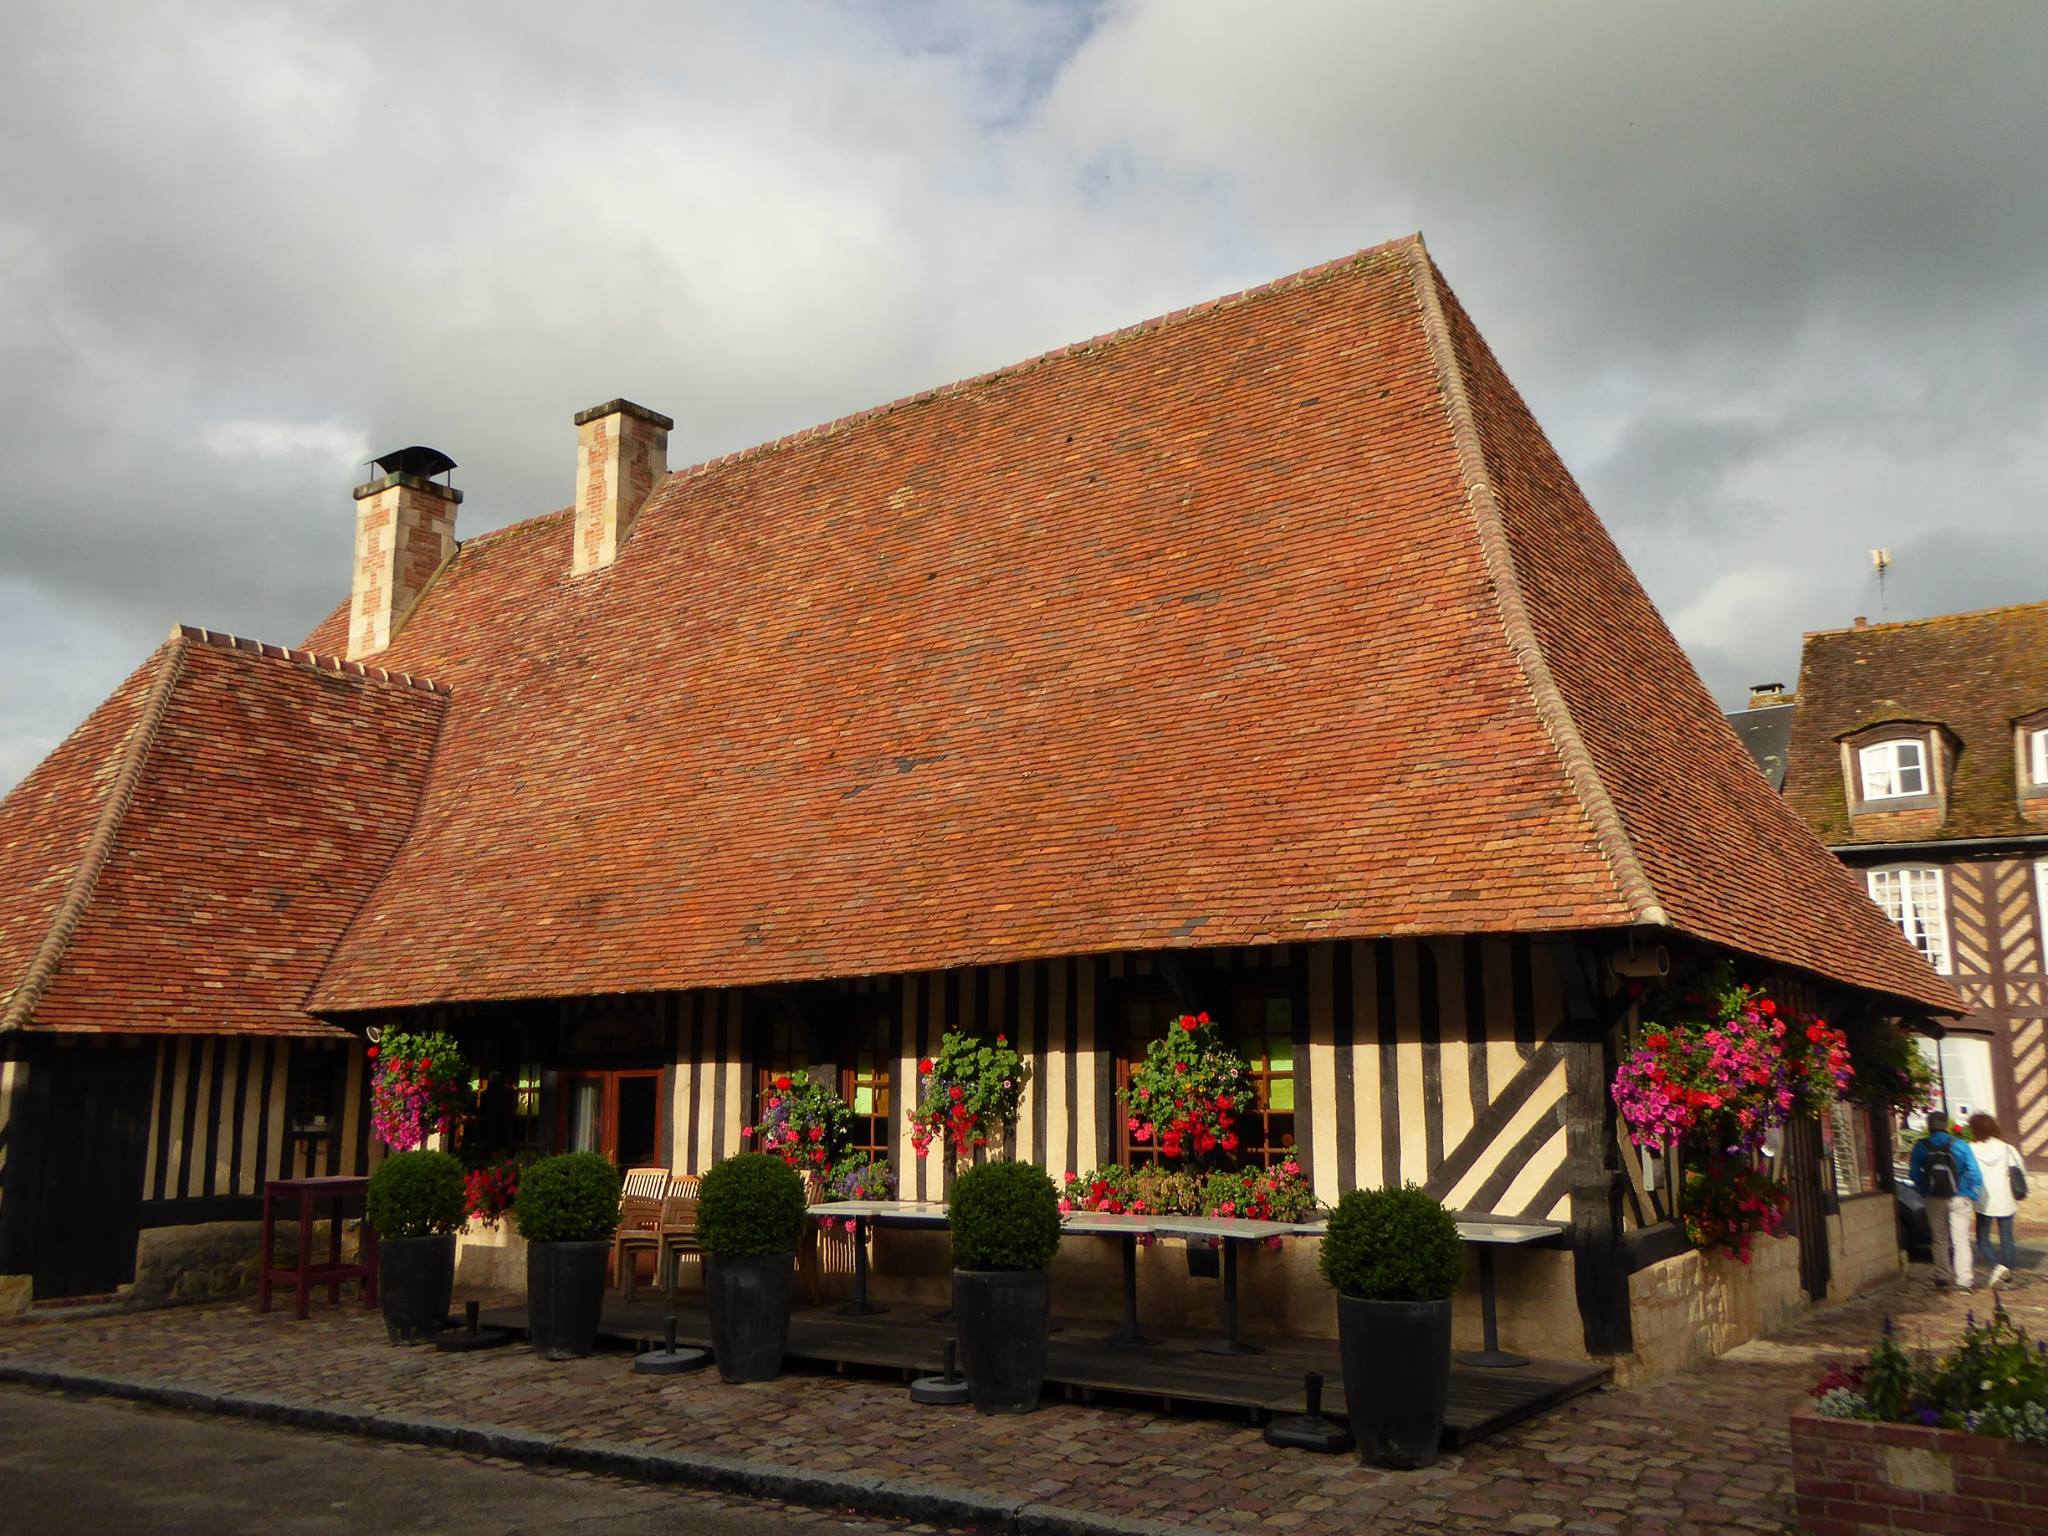 Half timbered house - half a millennium old - in the town of Beuvron-en-Auge